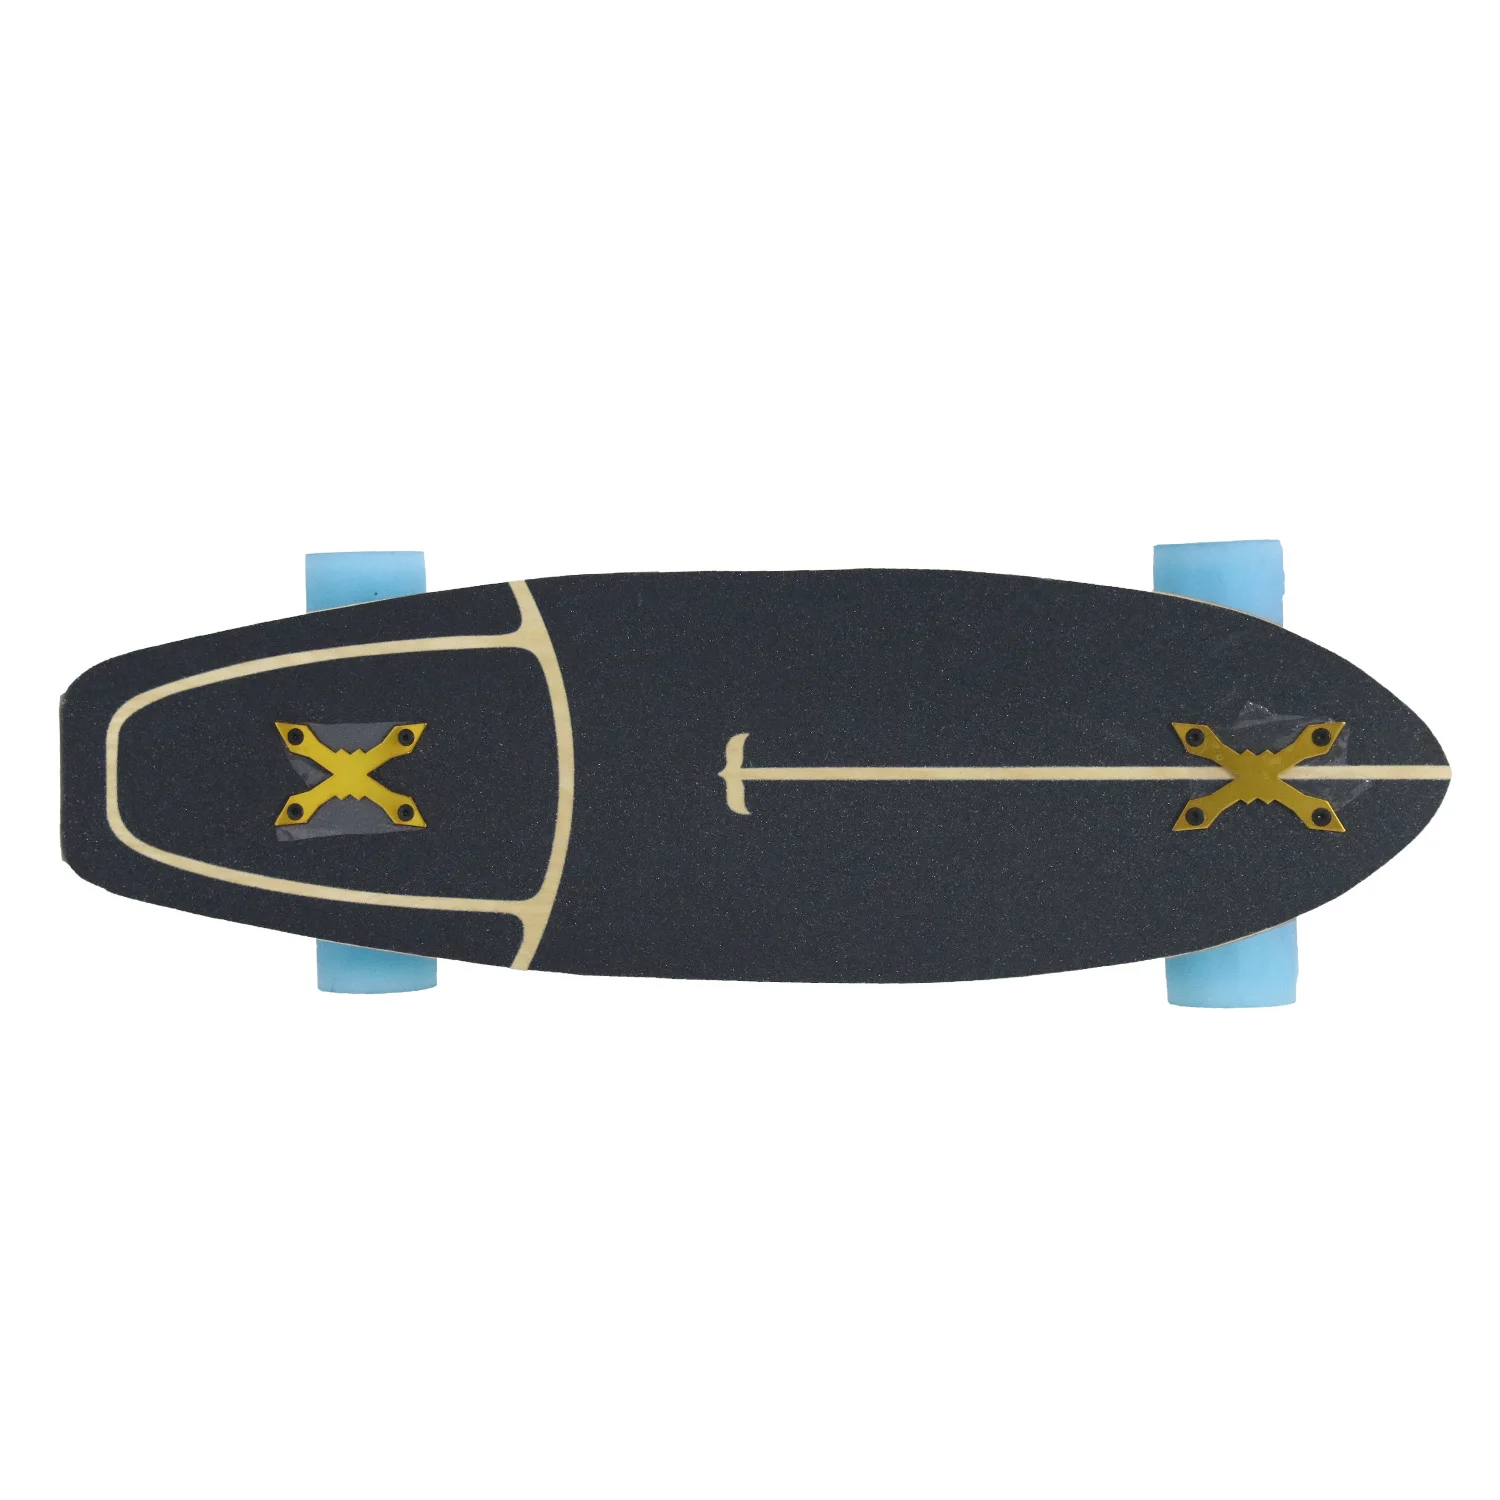 
7 Ply Northeast Maple Land Surf Skateboard 26X7.5 Surfing Skateboard for Adult Wholesale 